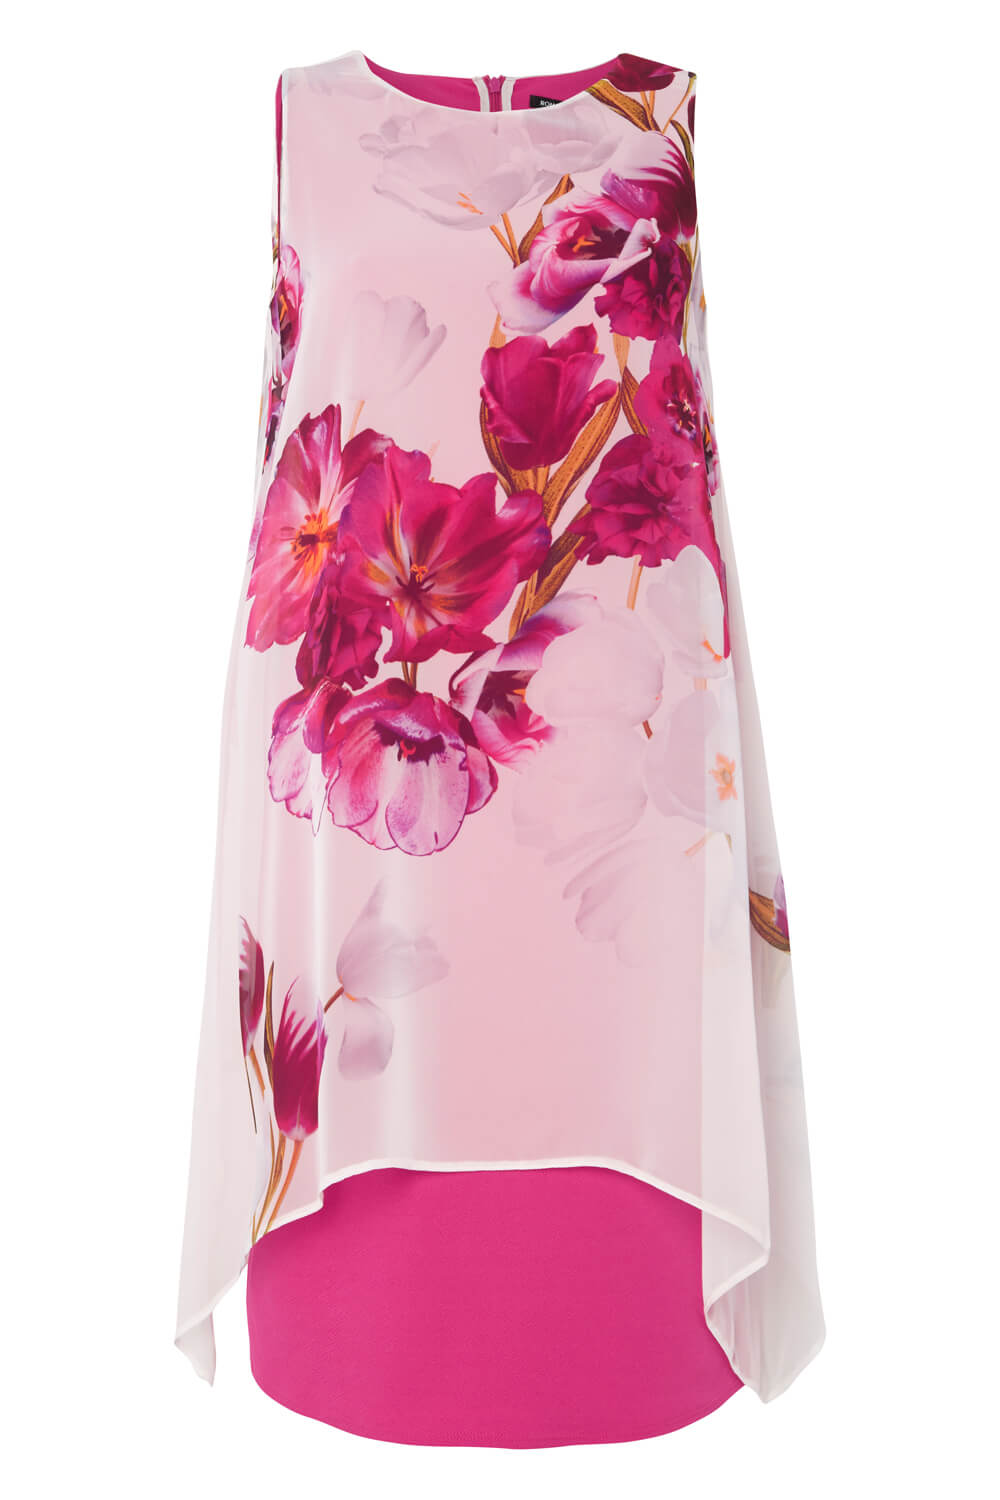 ORCHID Floral Print Chiffon Overlay Dress, Image 3 of 3